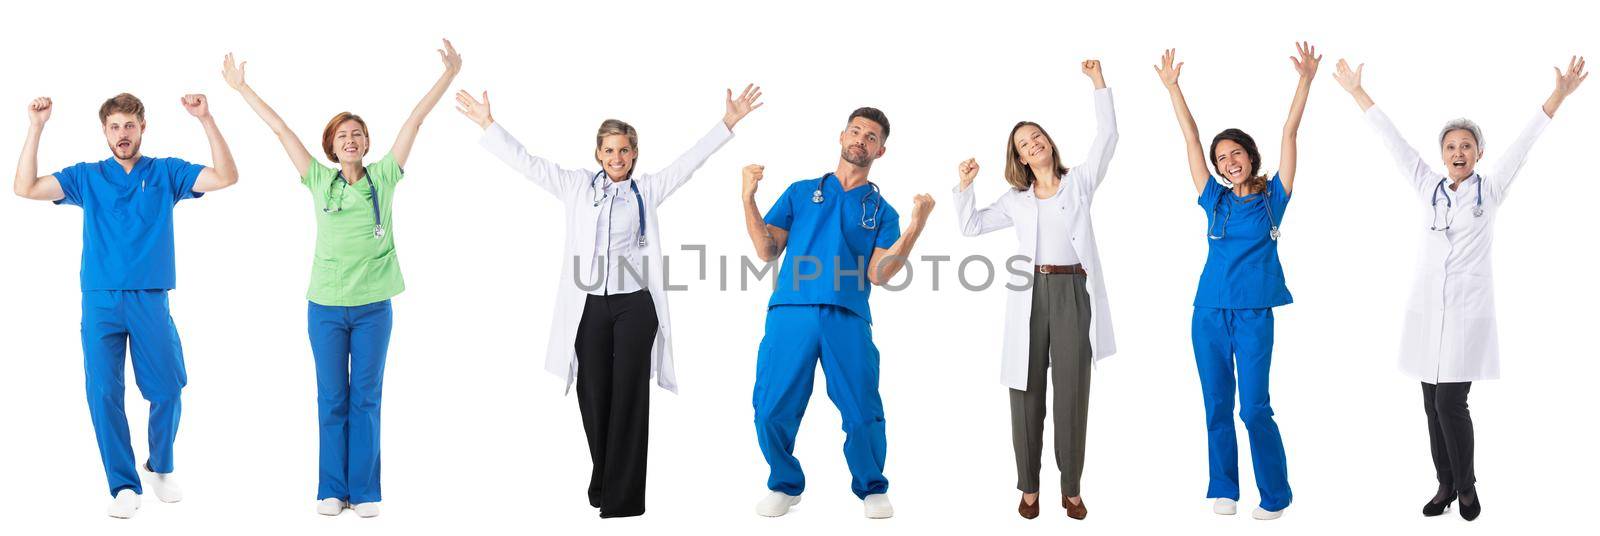 Set of Full length portraits of doctors and nurses medical staff in uniform with raised arms isolated on white background